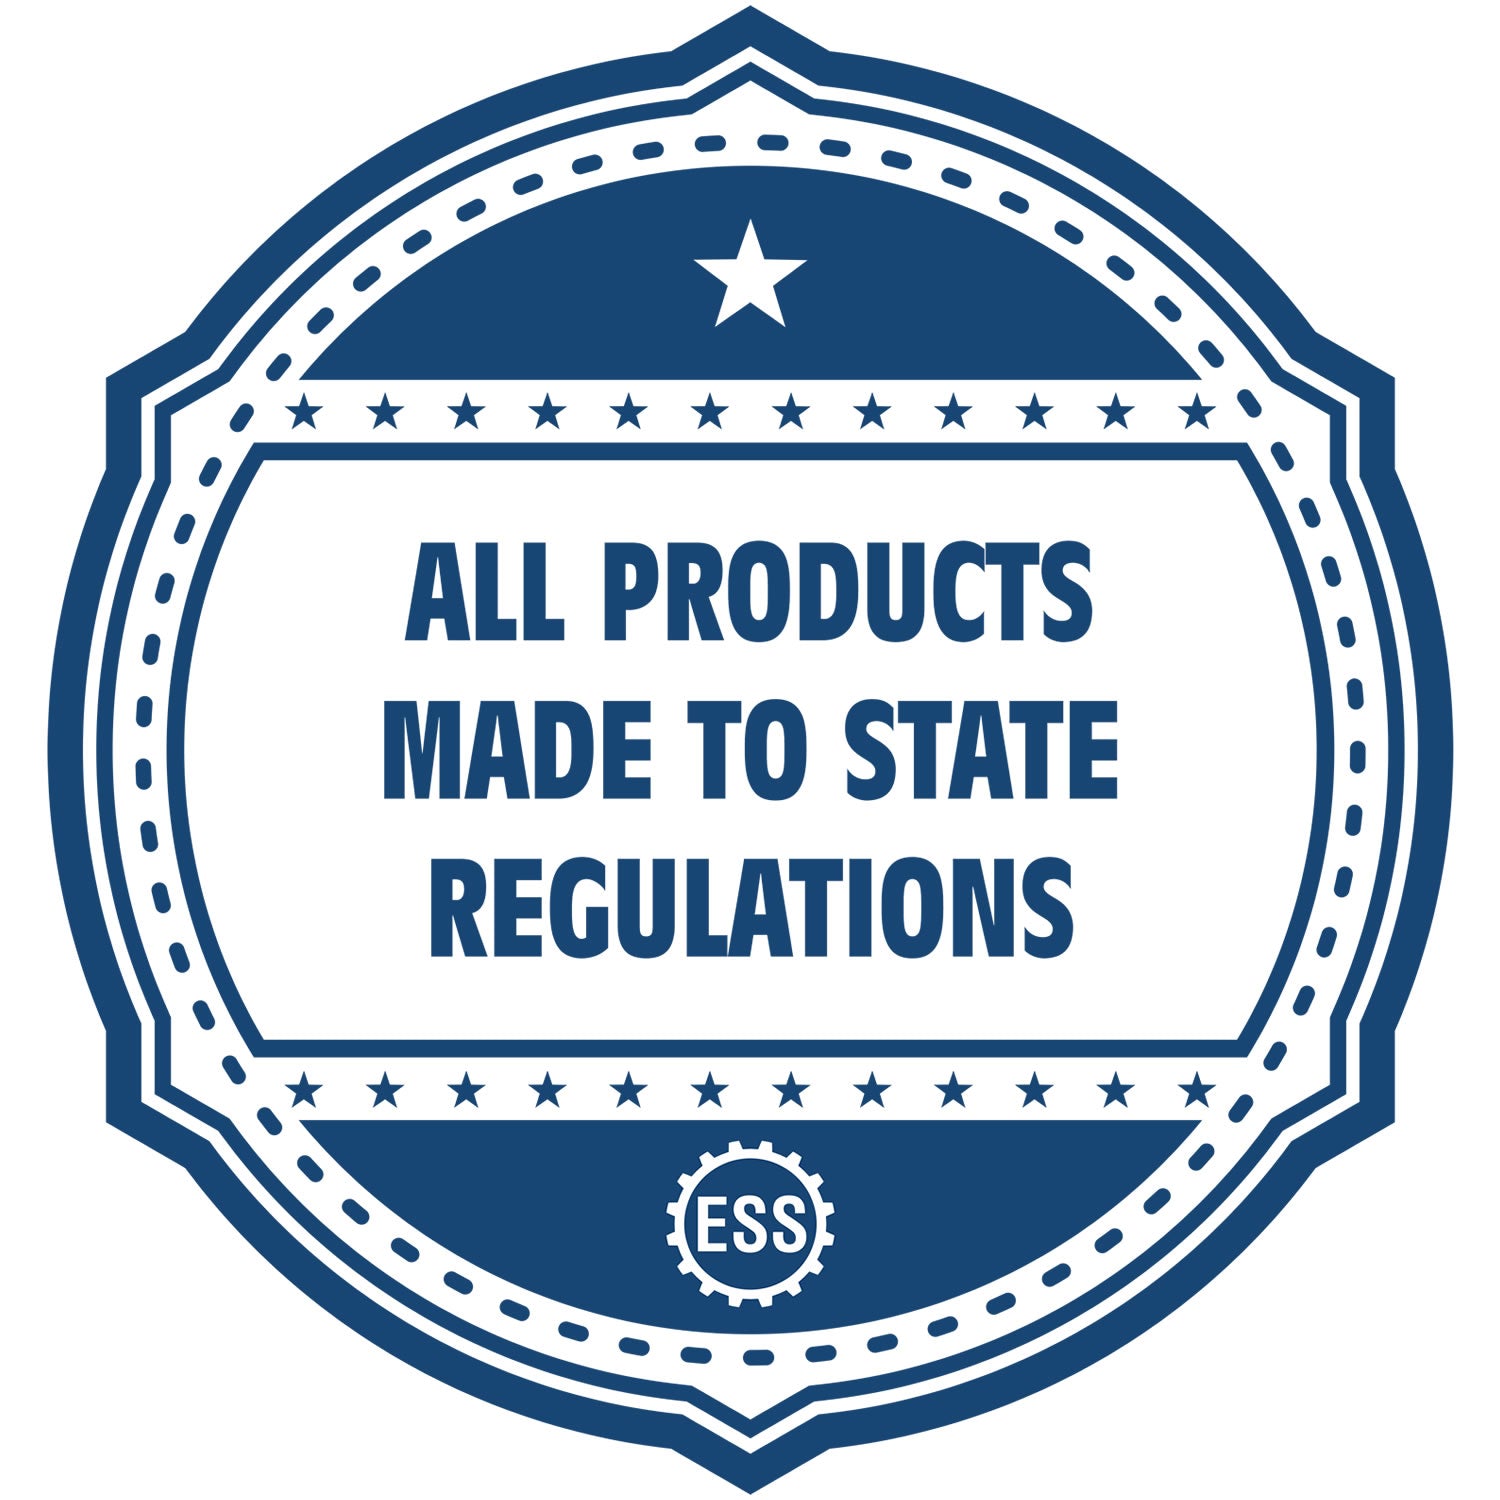 An icon or badge element for the Delaware Landscape Architectural Seal Stamp showing that this product is made in compliance with state regulations.